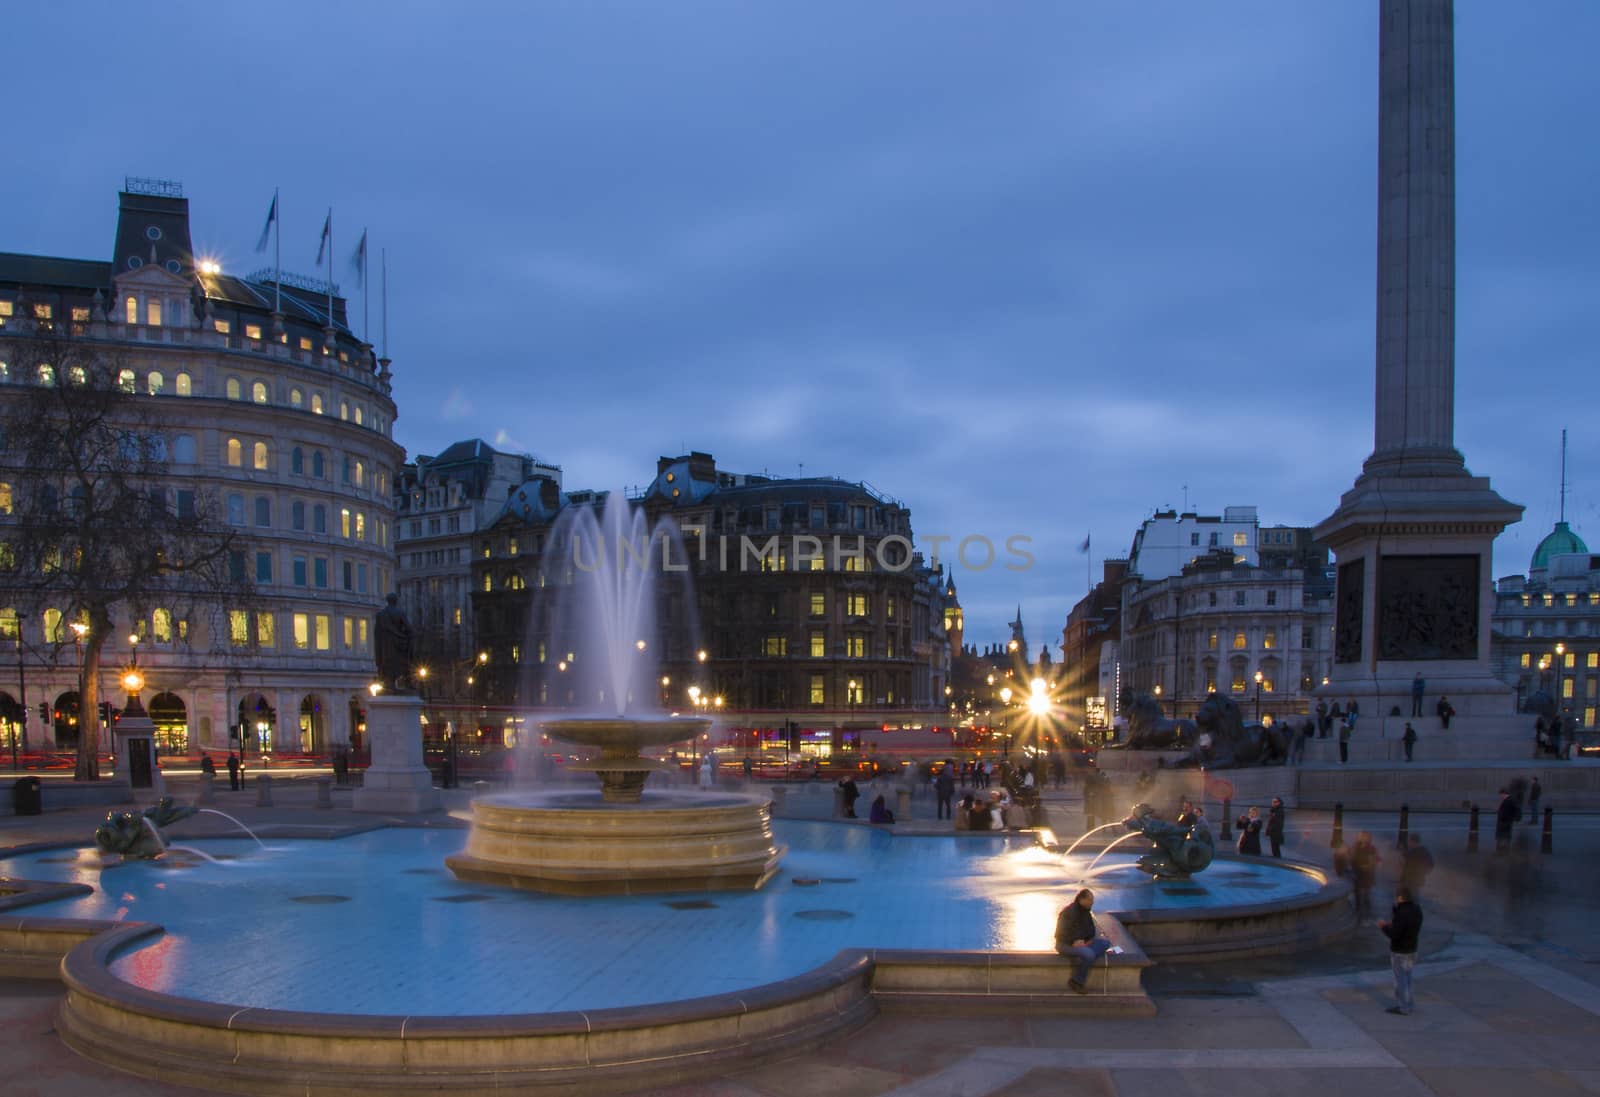 Trafalgar Square in the blue hour, London by tanaonte